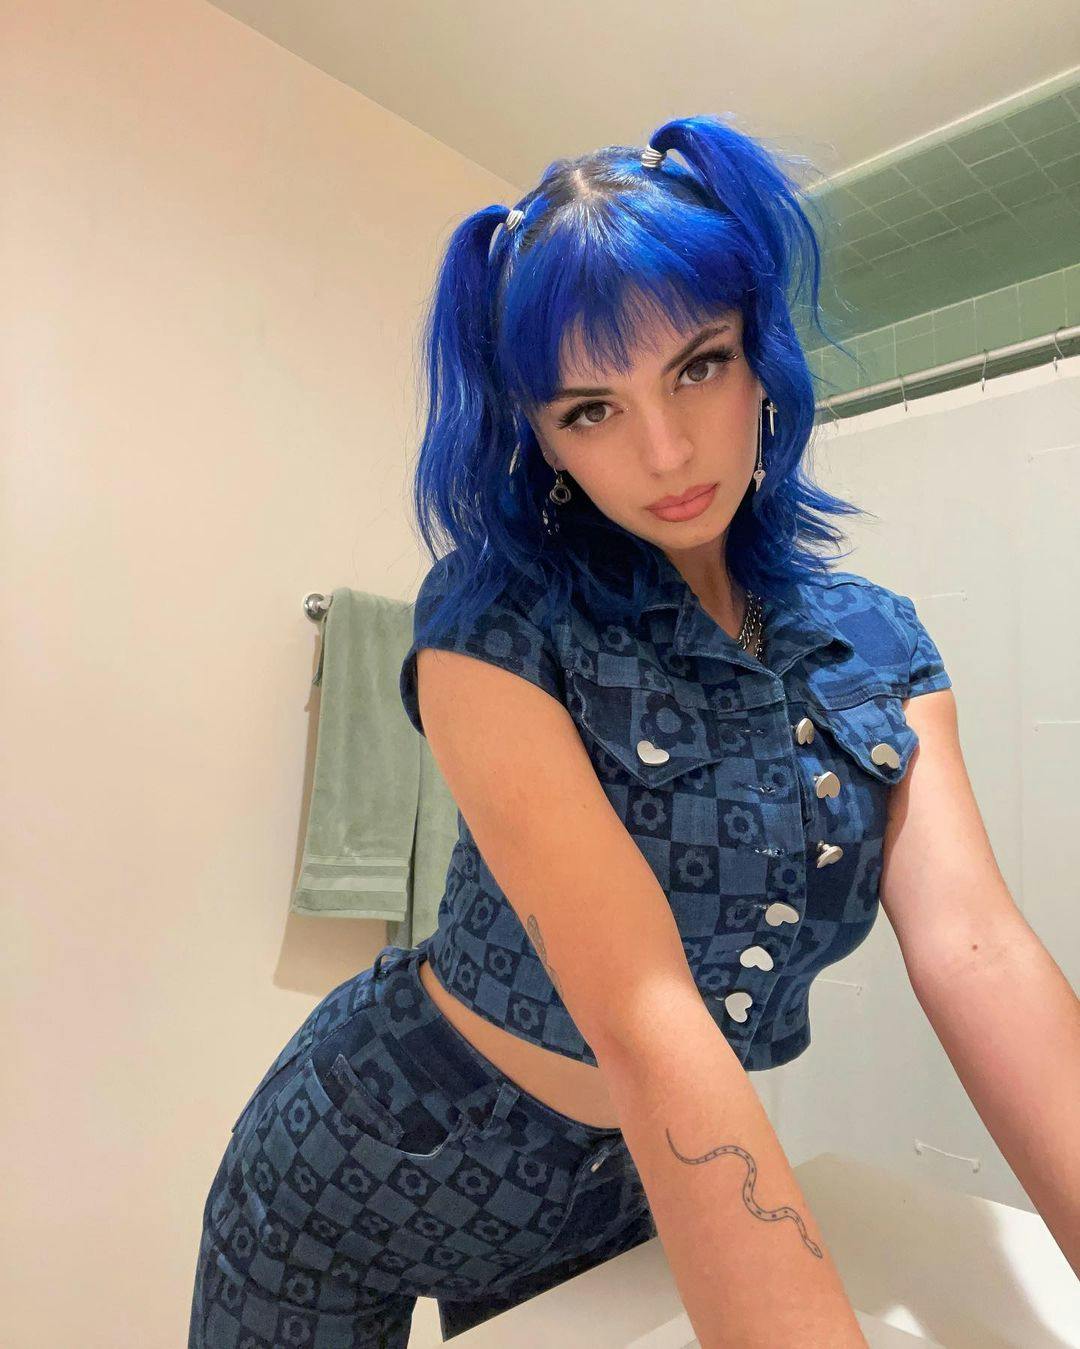 Rebecca Black in a blue outfit by Jaded London.